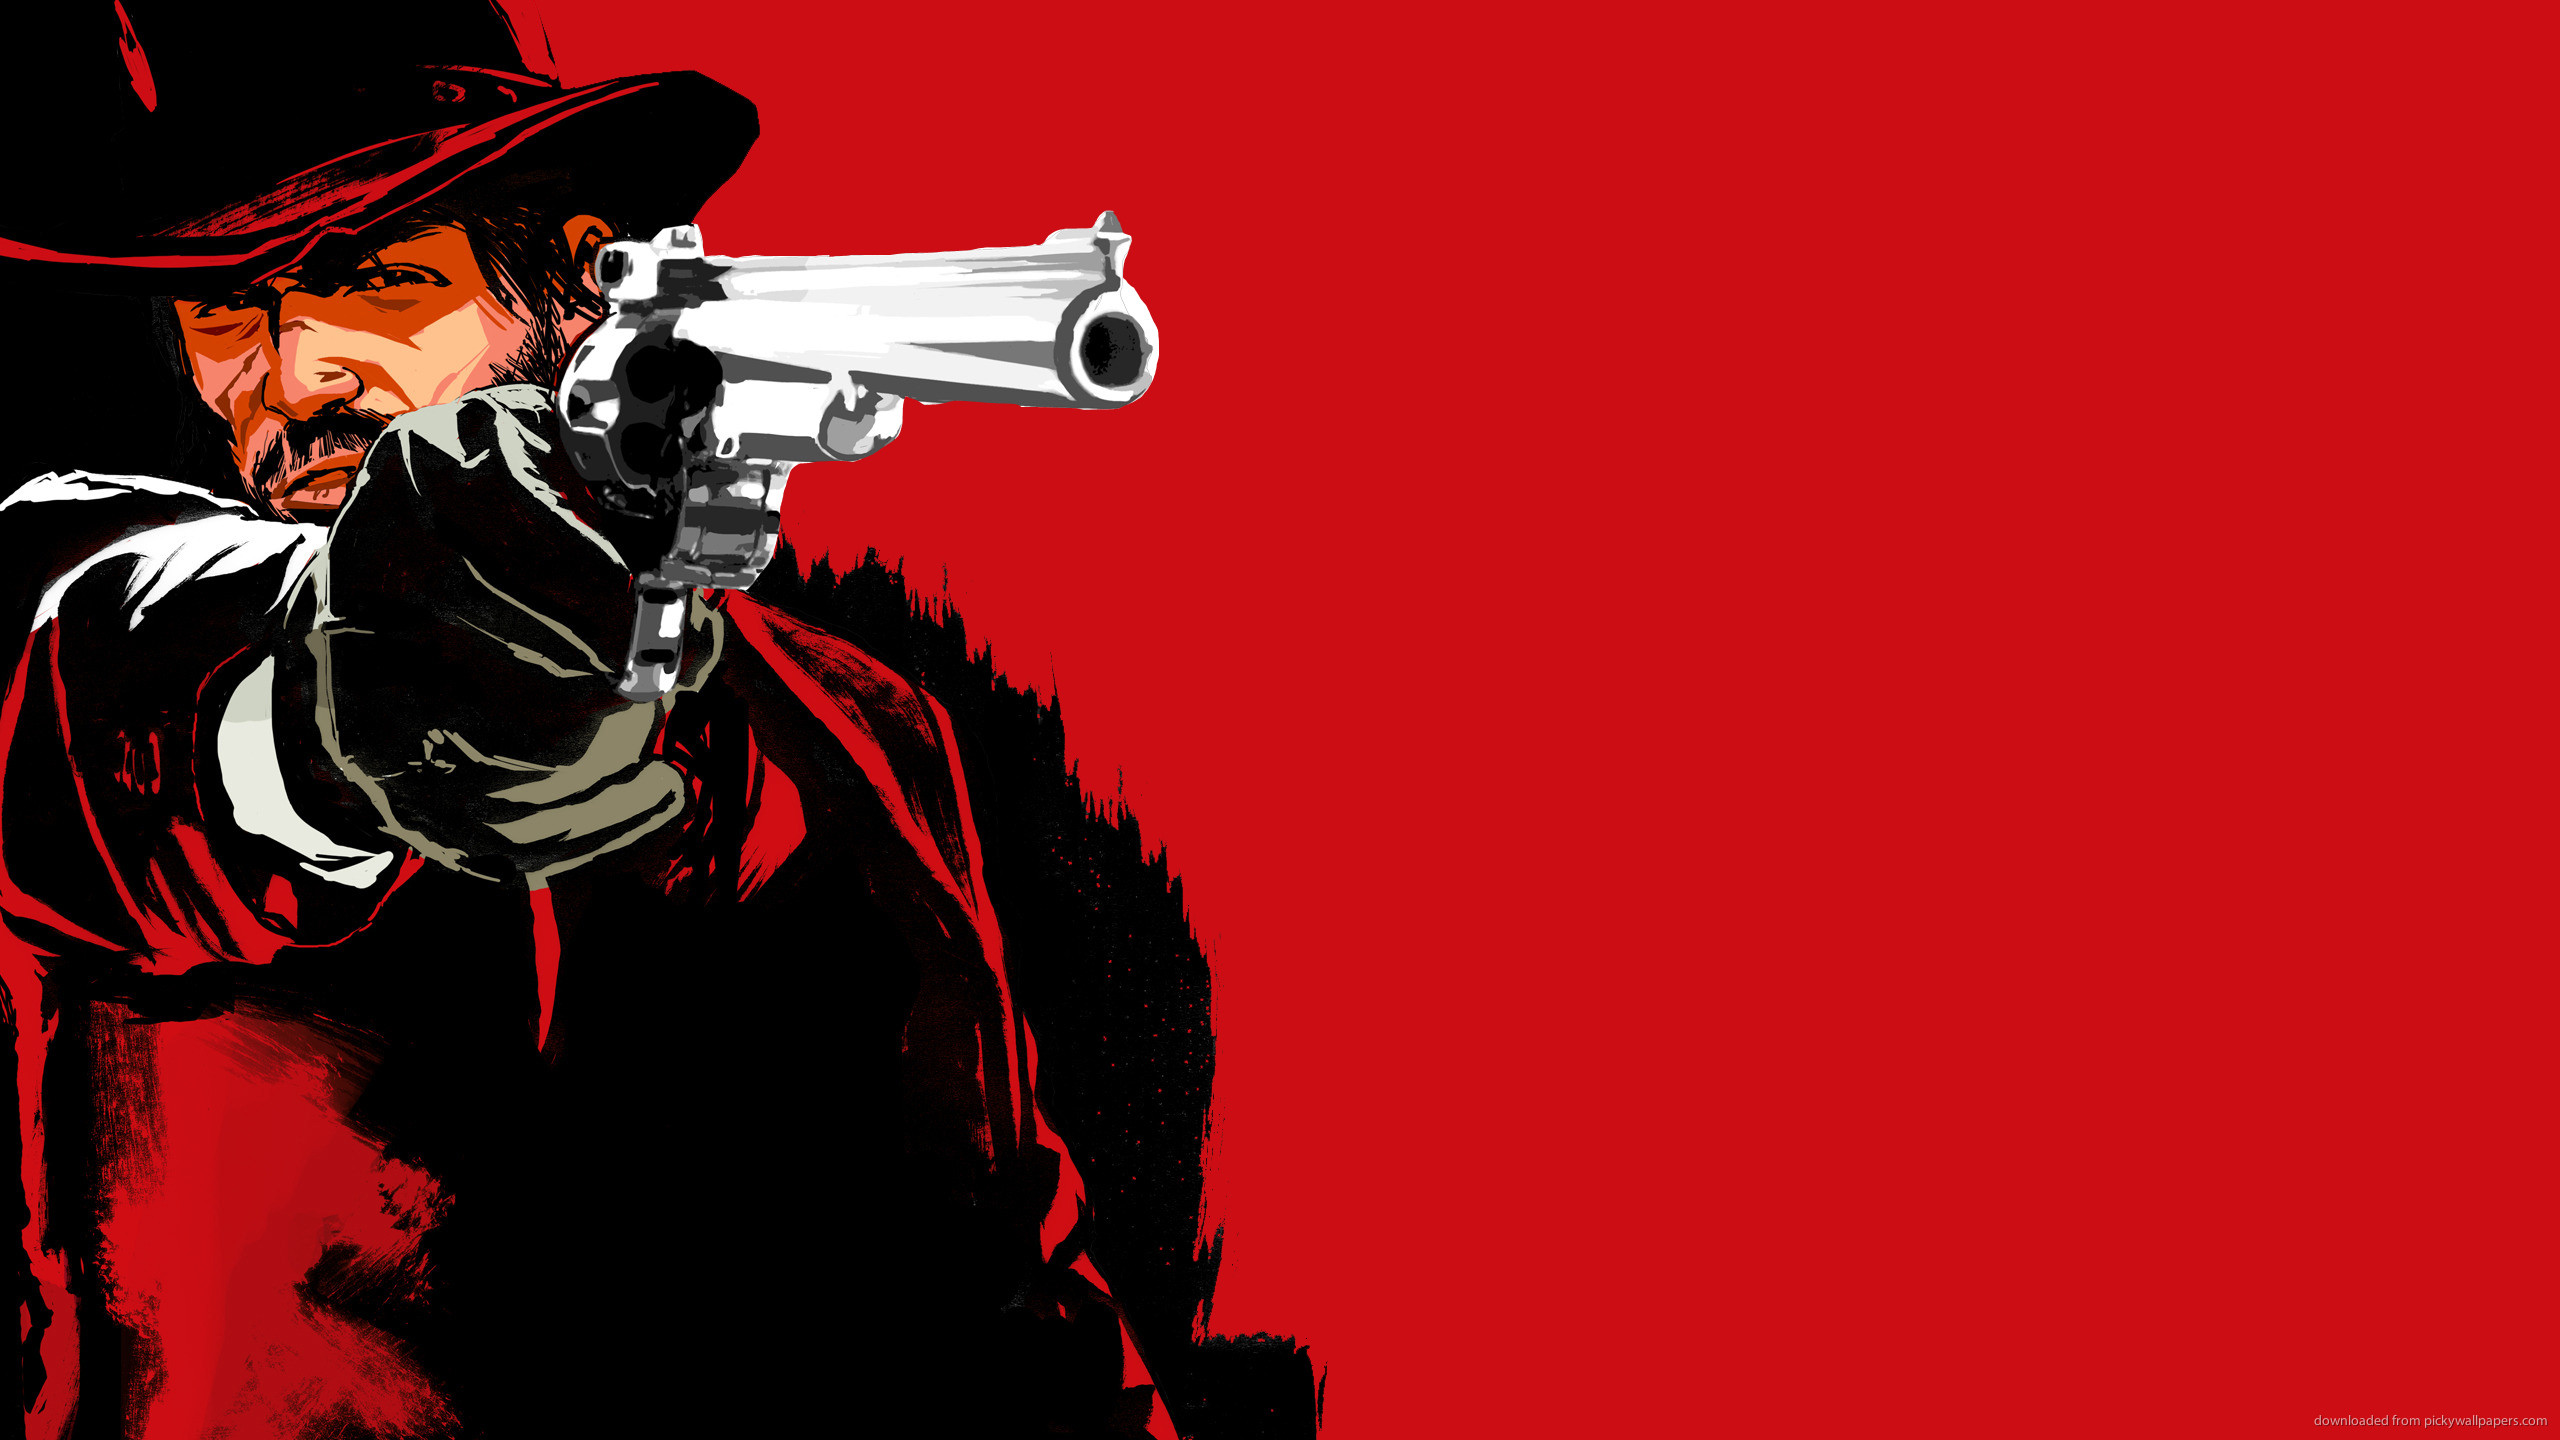 2560x1440 RDR John Marston with gun on a red background for 